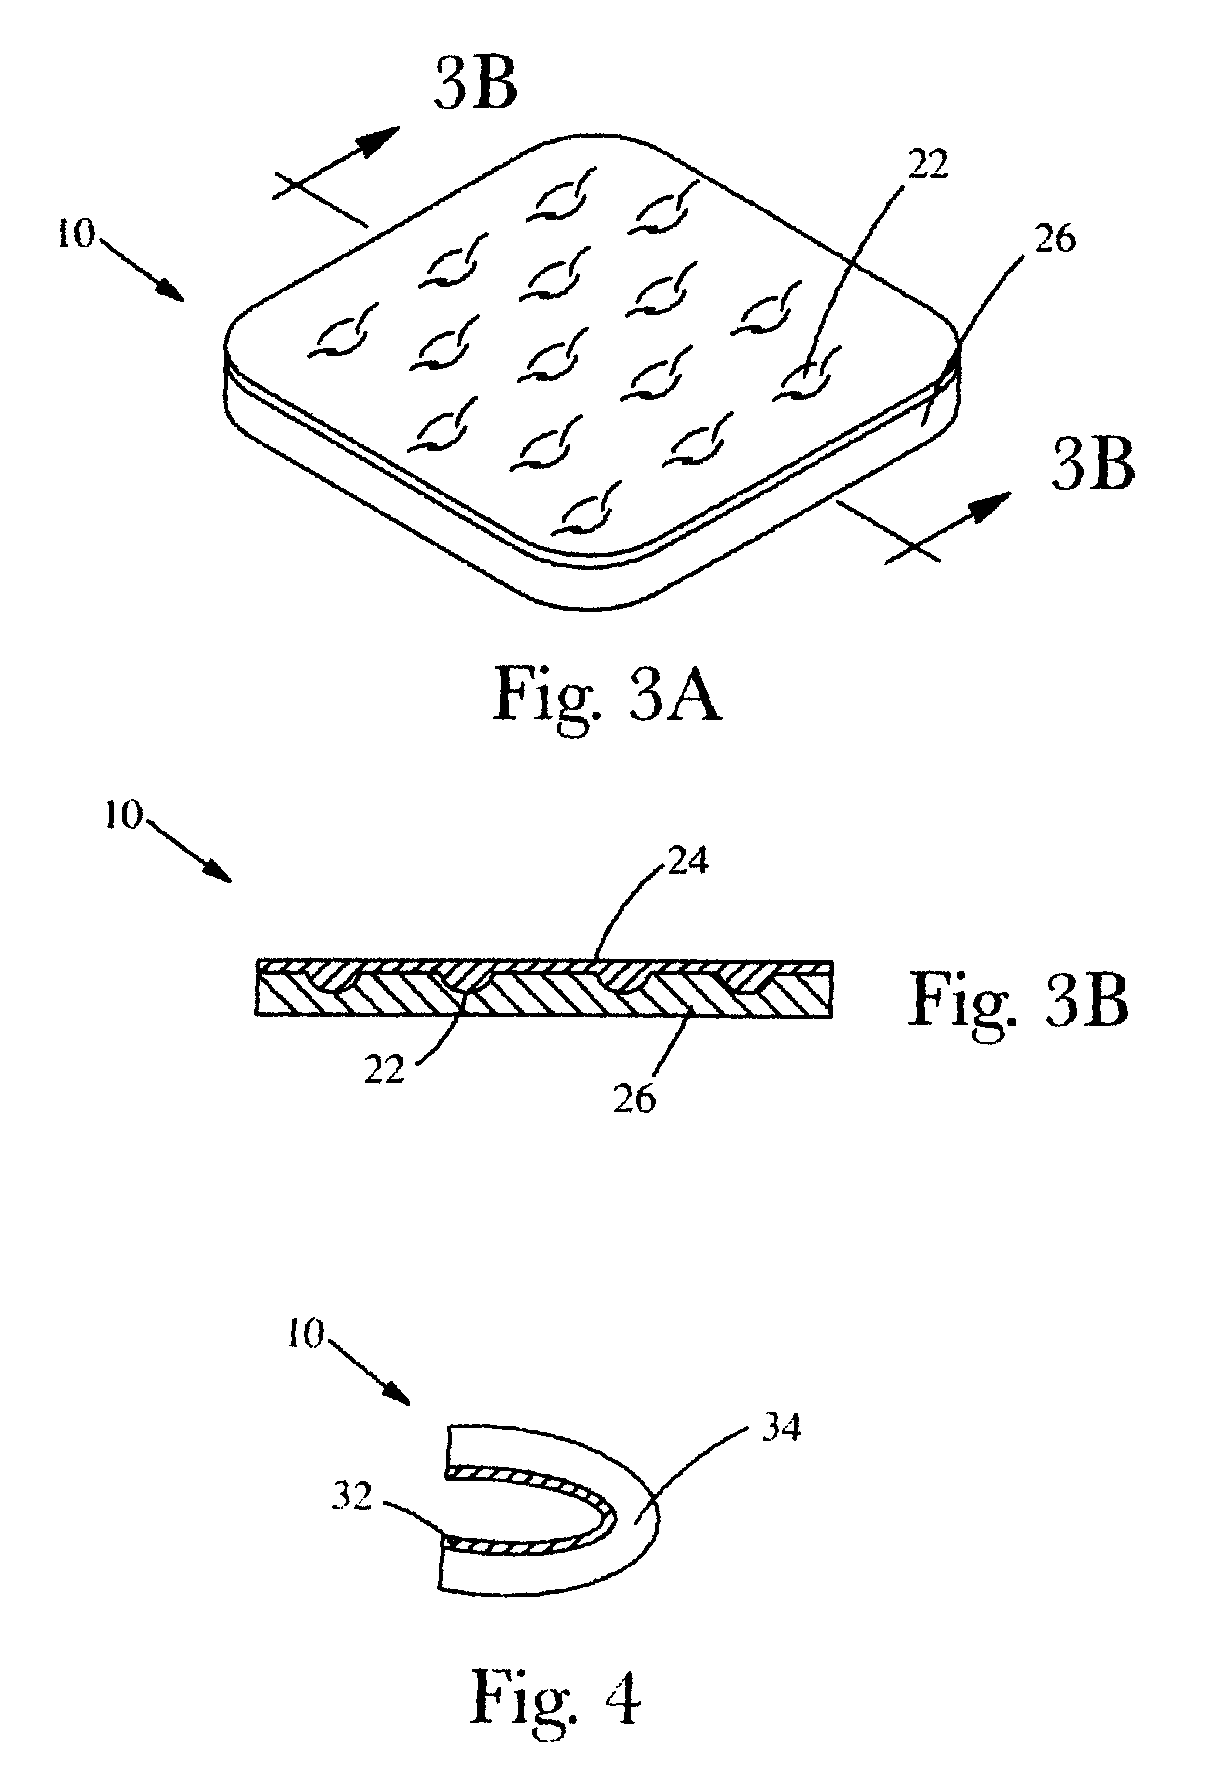 Porous, dissolvable solid substrate and surface resident coating comprising matrix microspheres